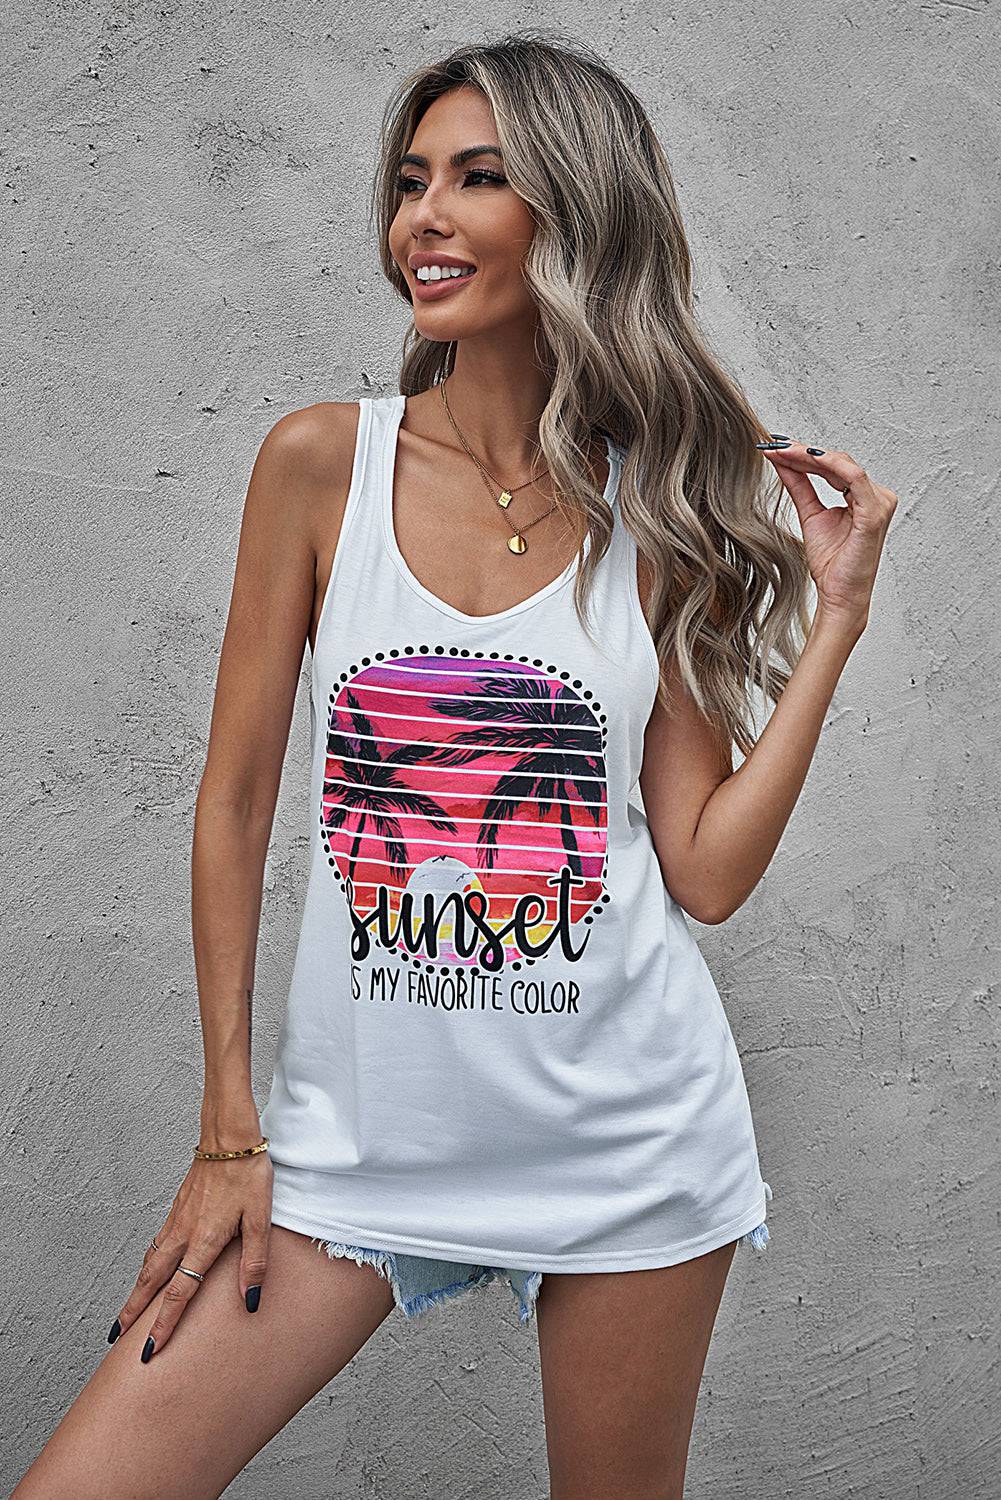 Sunset Is My Favorite Color Tank - Embrace the Magic of Sunset with this Luxurious and Versatile Top - Drift Away into Romance and Comfort. - Guy Christopher 